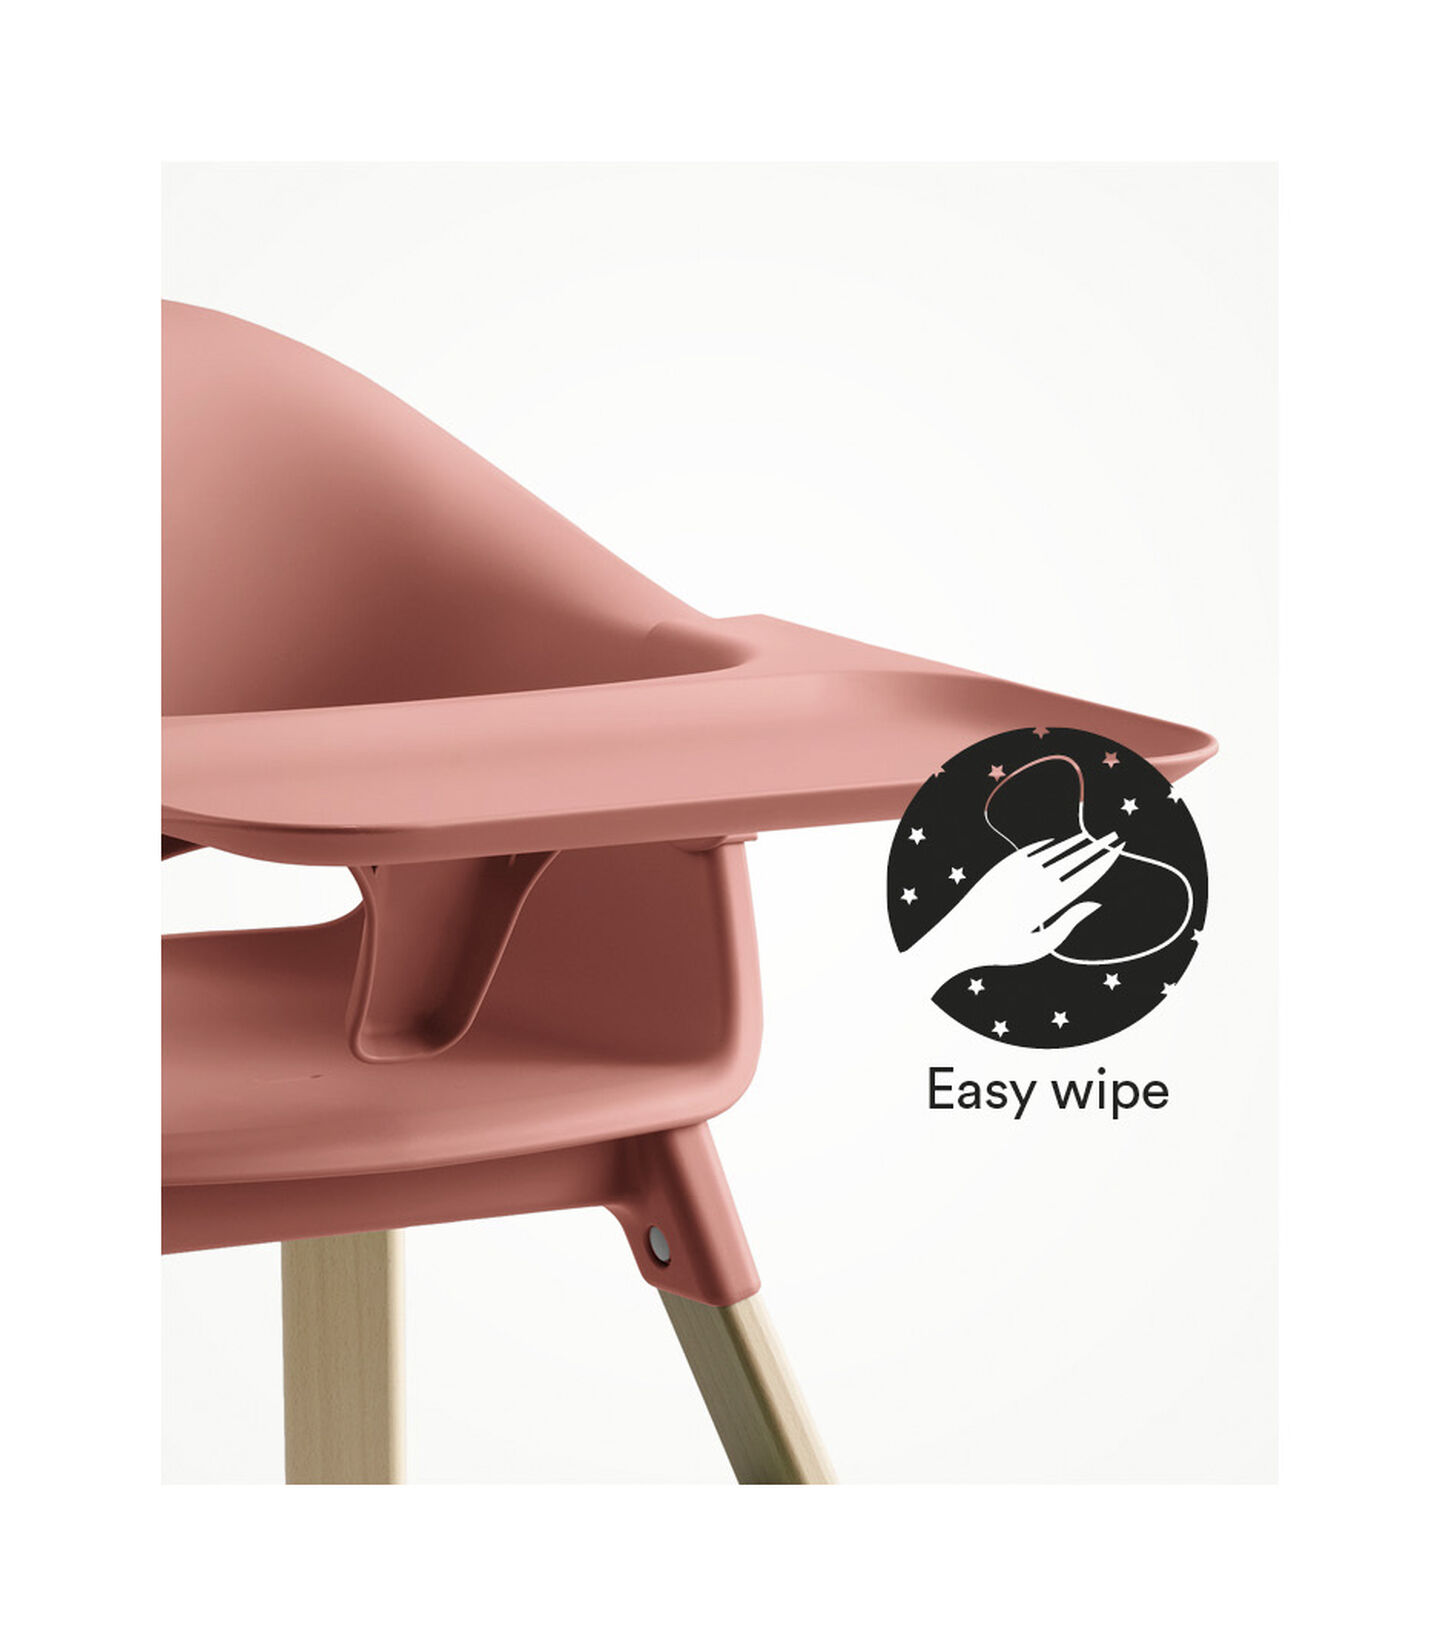 Stokke® Clikk™ High Chair with Tray, in Natural and Sunny Coral. Easy Wipe. view 4